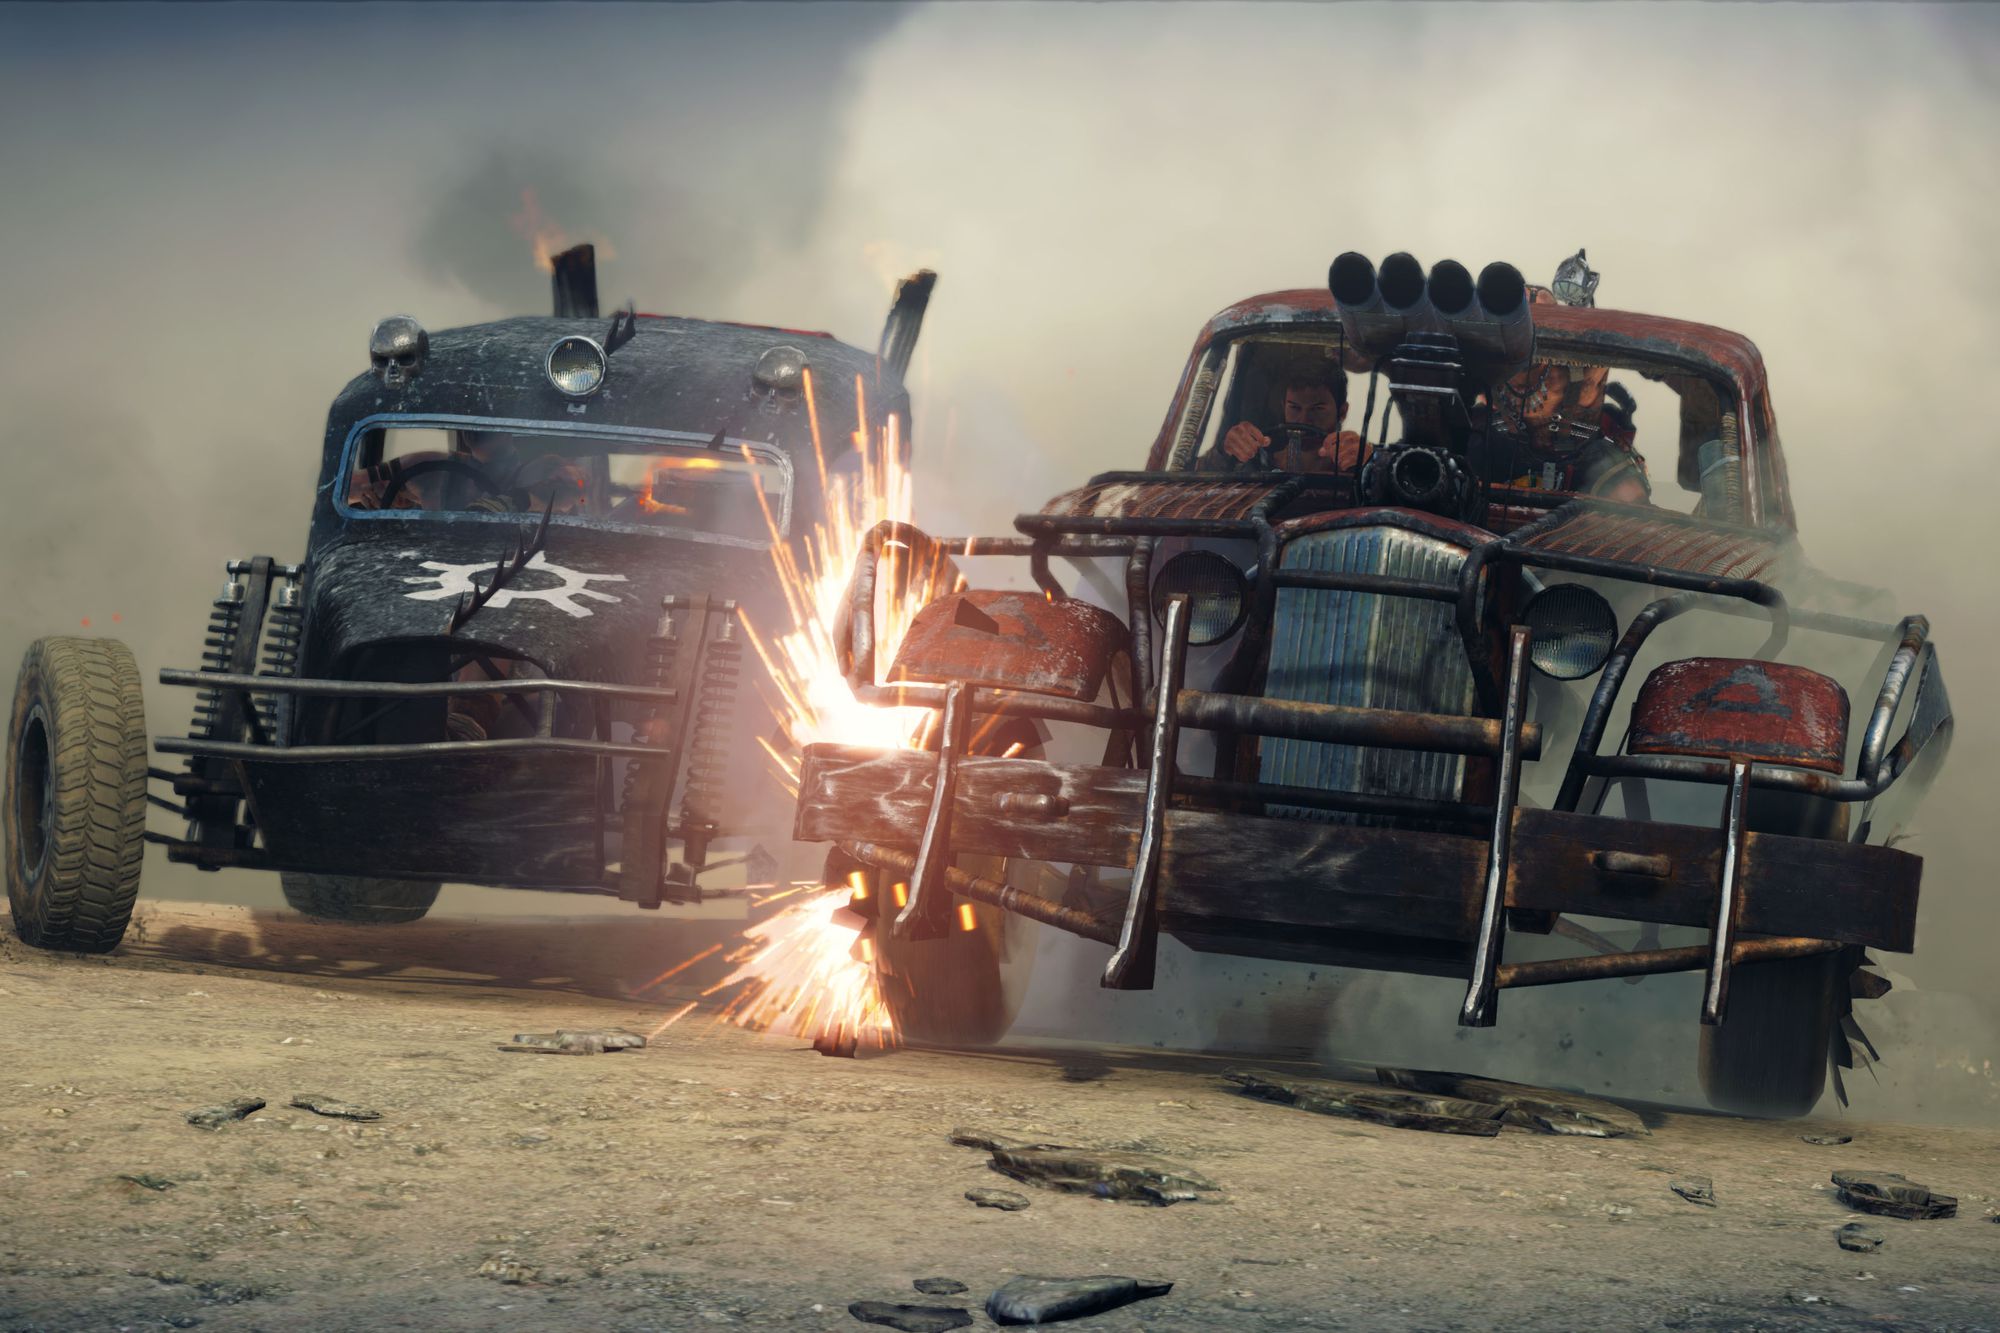 The Mad Max game has little to do with the movie, but could be just as good